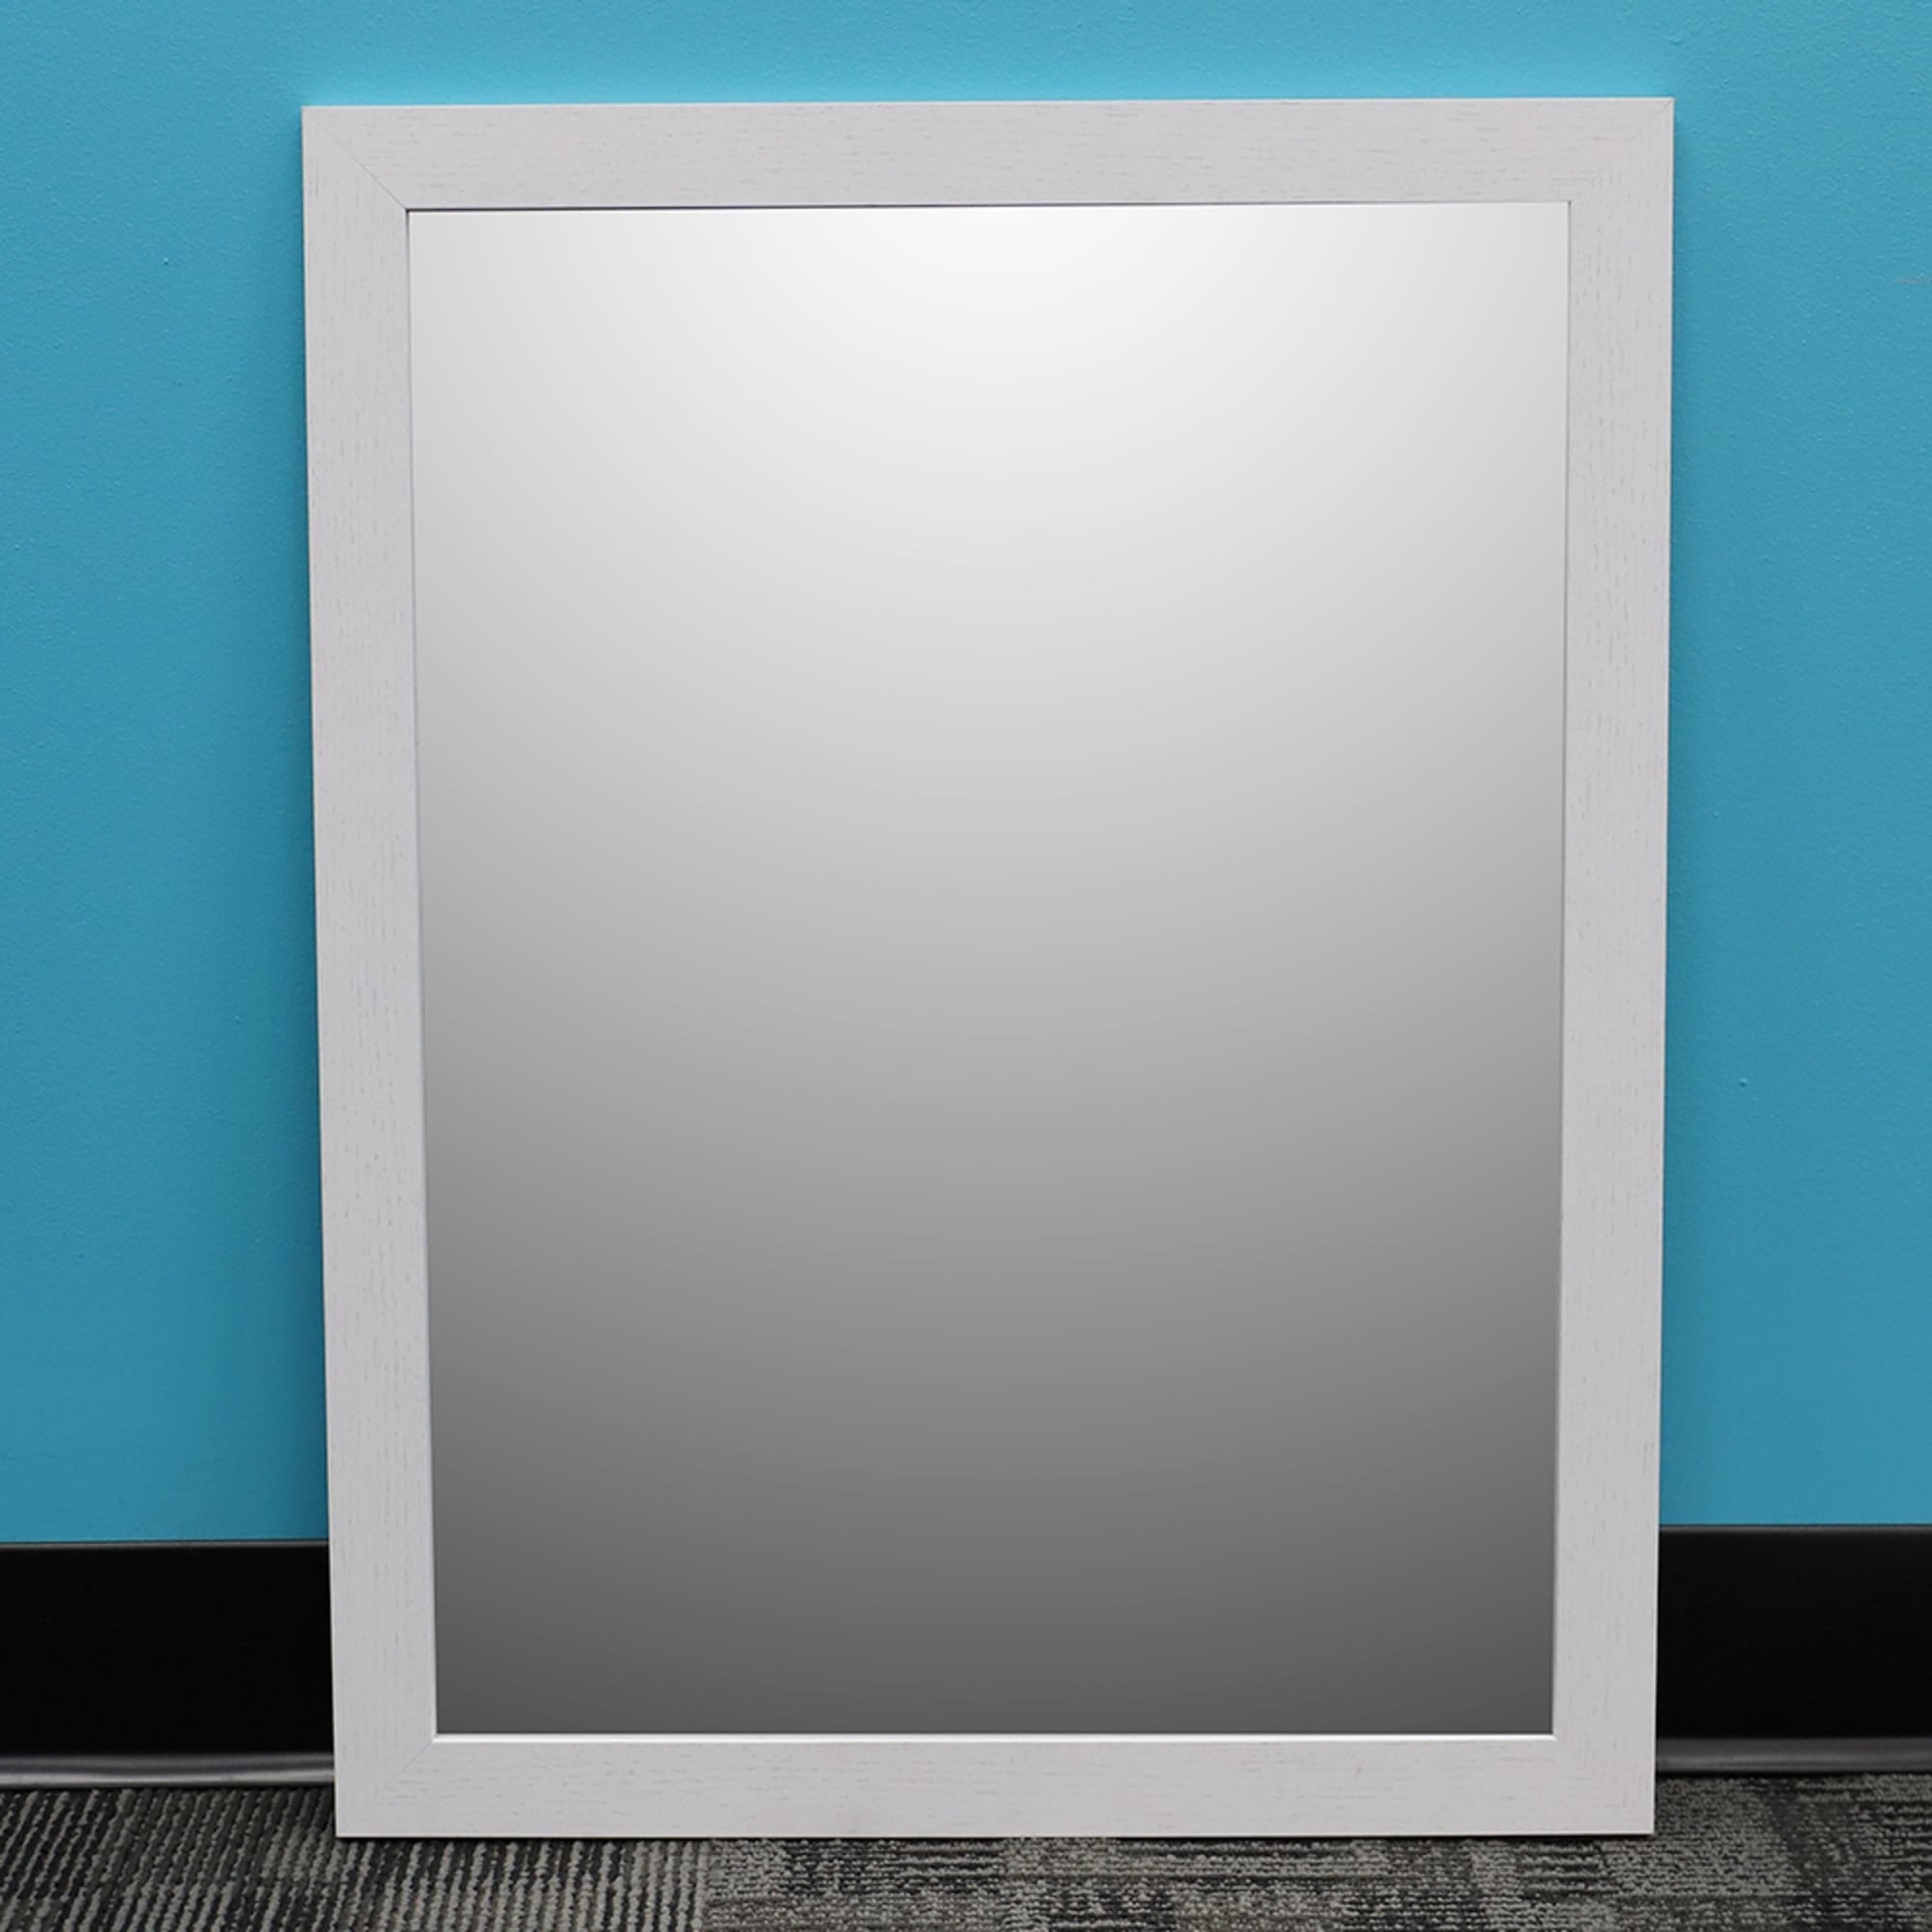 Home Basics Framed Painted MDF 18” x 24” Wall Mirror, White $10.00 EACH, CASE PACK OF 6